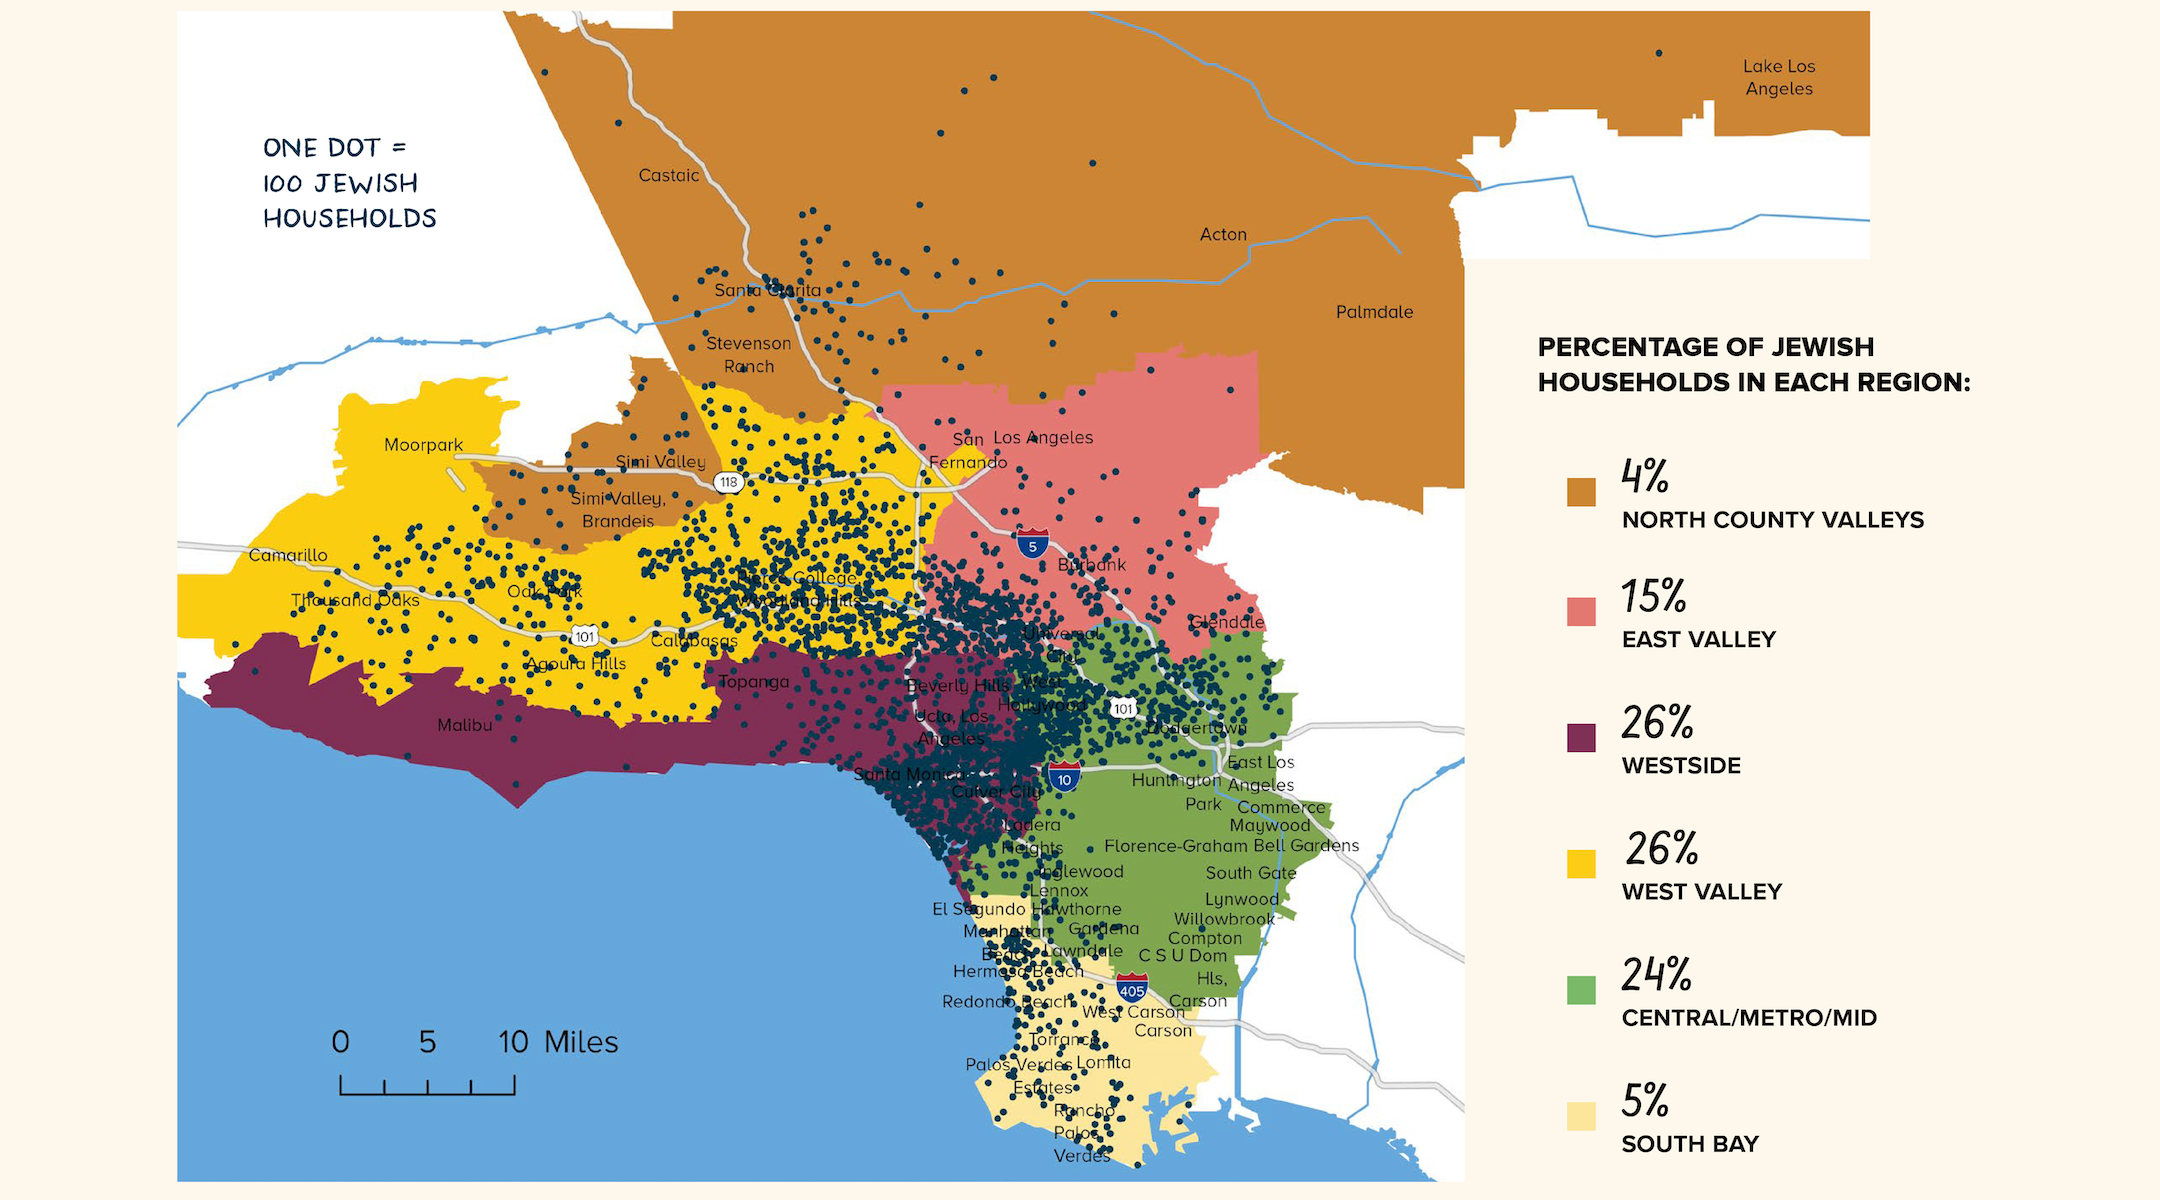 Map of Jewish households in Los Angeles, according to the new population survey (Courtesy of the Jewish Federation of Greater Los Angeles)